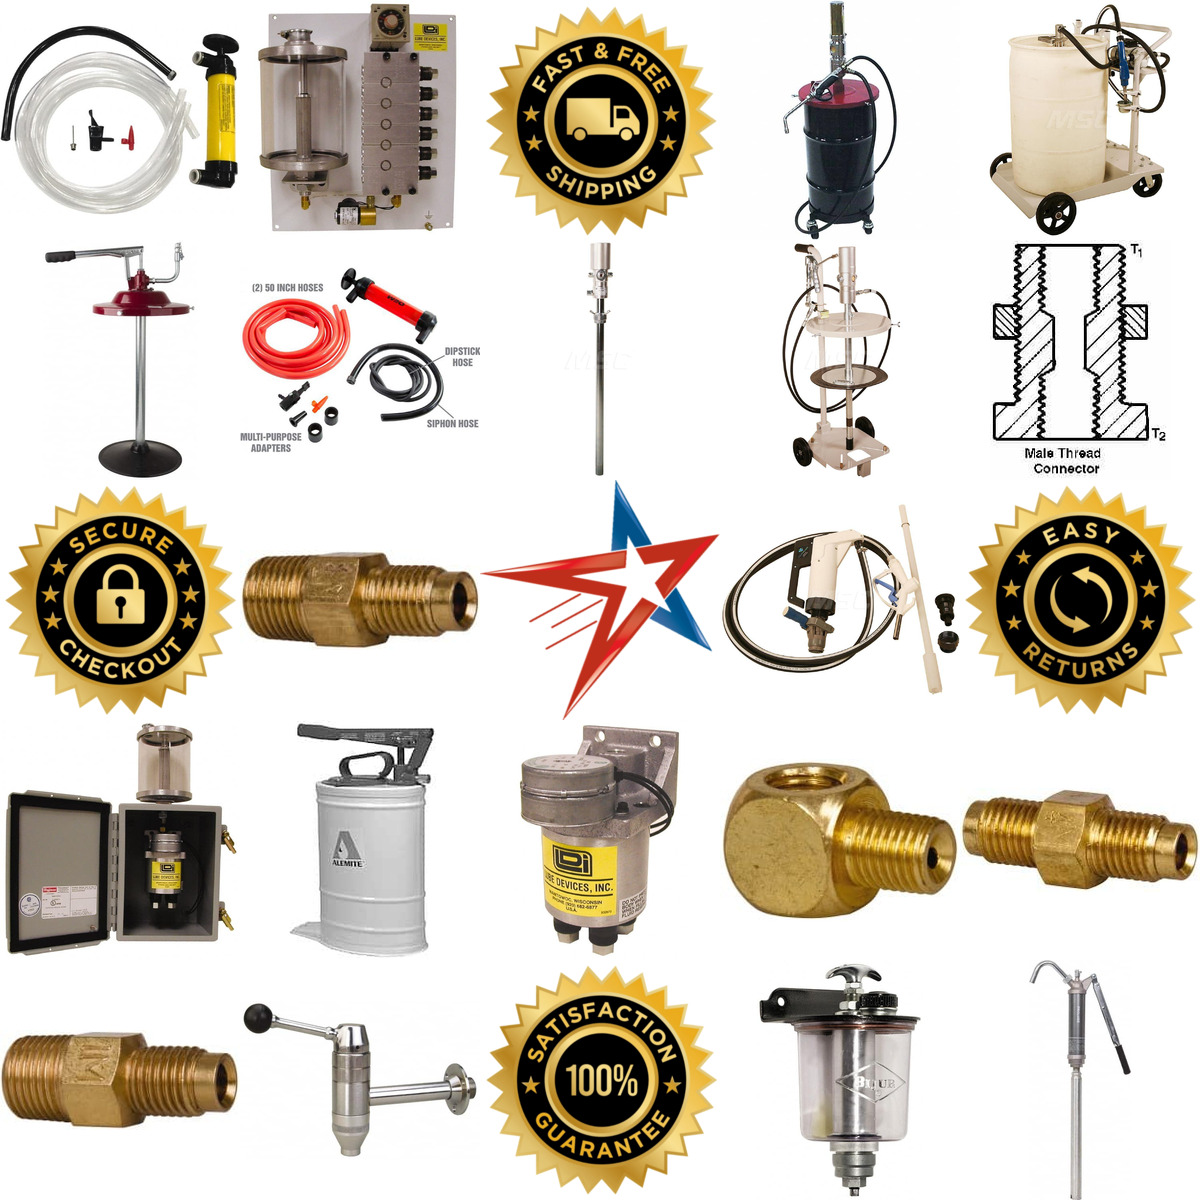 A selection of Lubrication Pumps and Systems products on GoVets